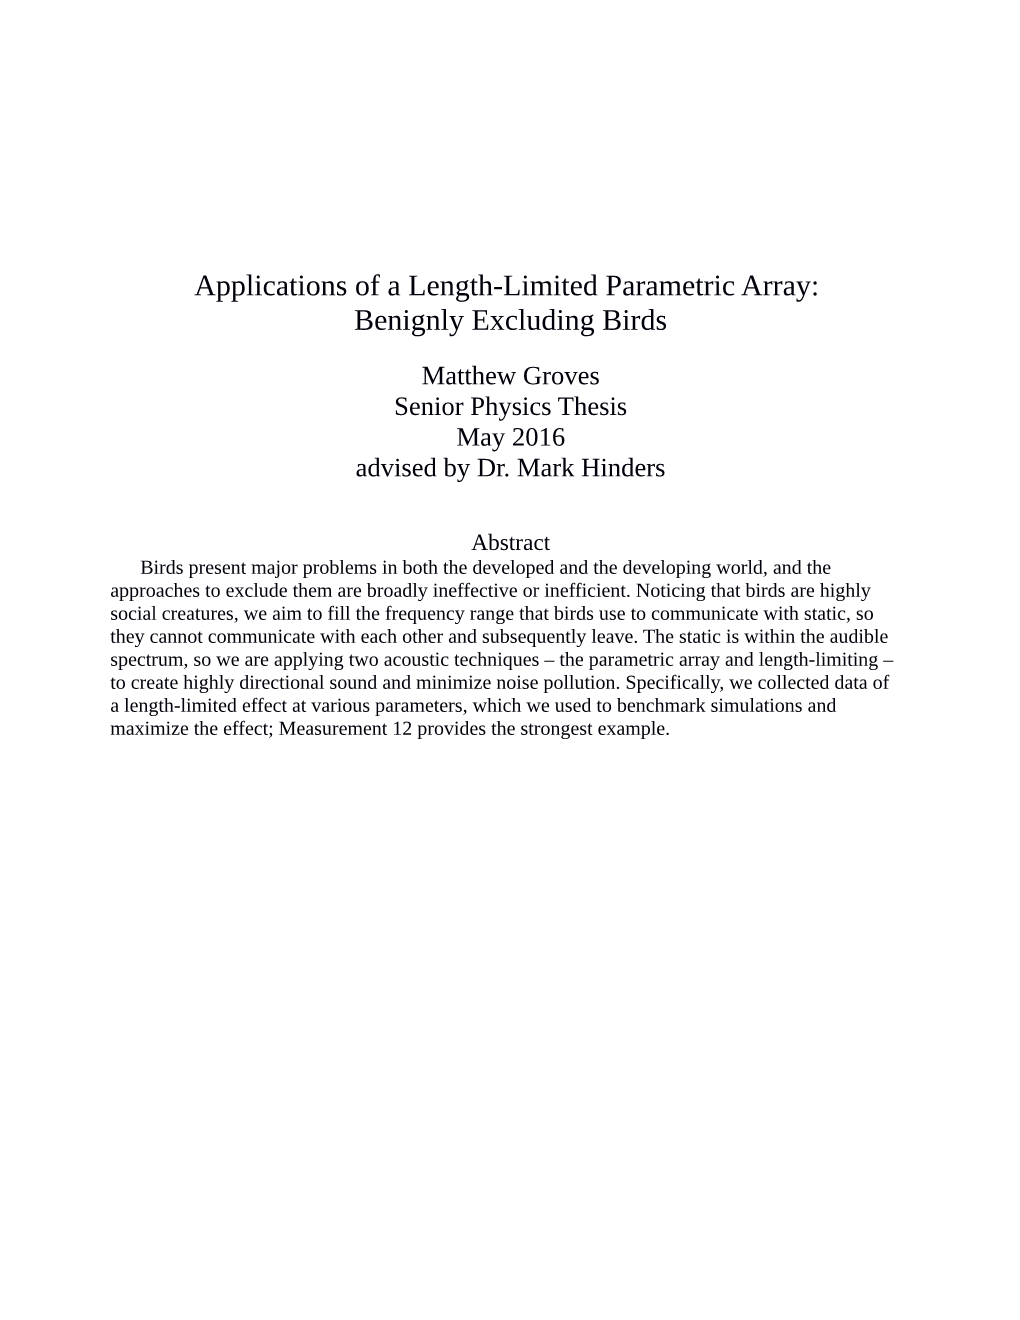 Applications of a Length-Limited Parametric Array: Benignly Excluding Birds